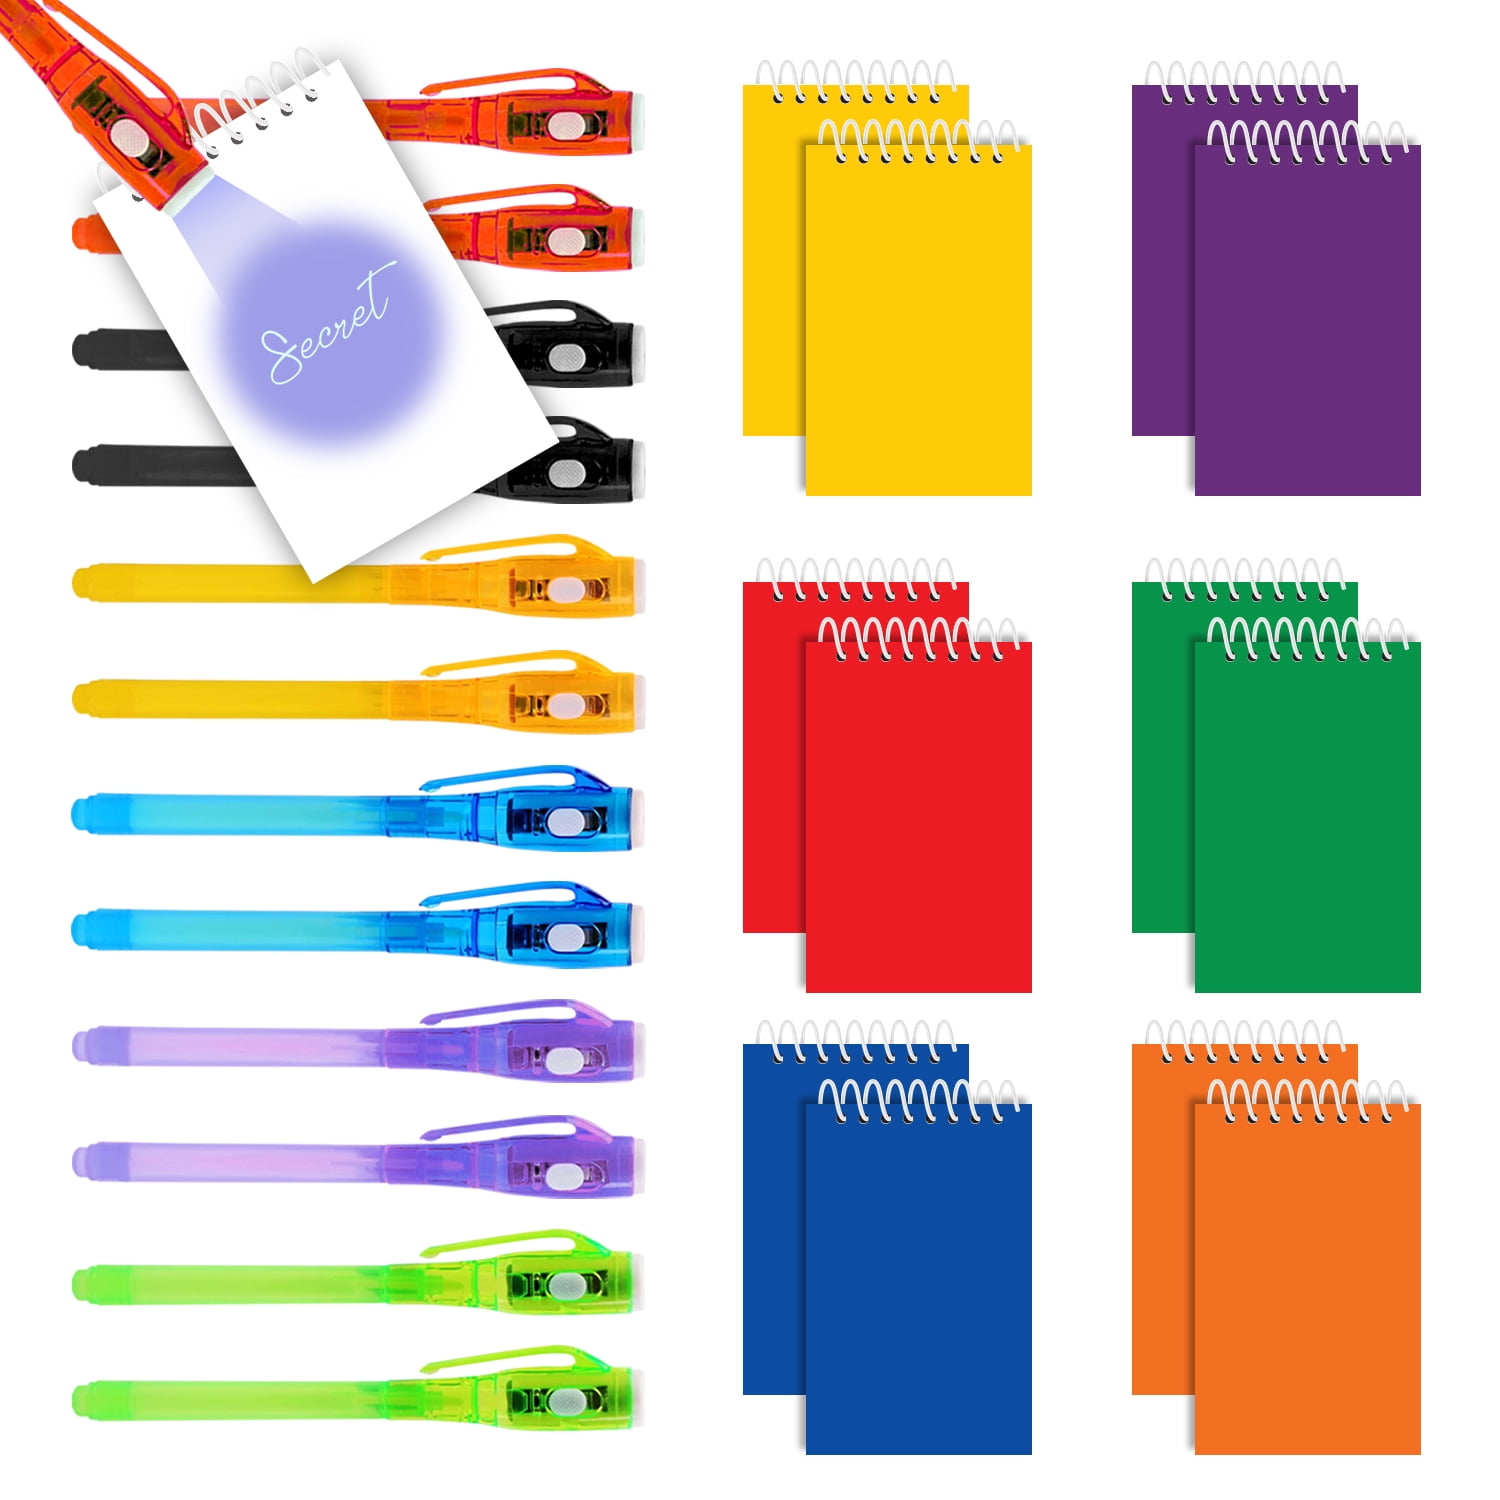 Invisible Ink Pen and Notebook Pack of 16 - BONNYCO | Safari Party Favors  for Kids | Spy Pen Jungle Party Favors, Animal Prizes for Kids | Magic Pen